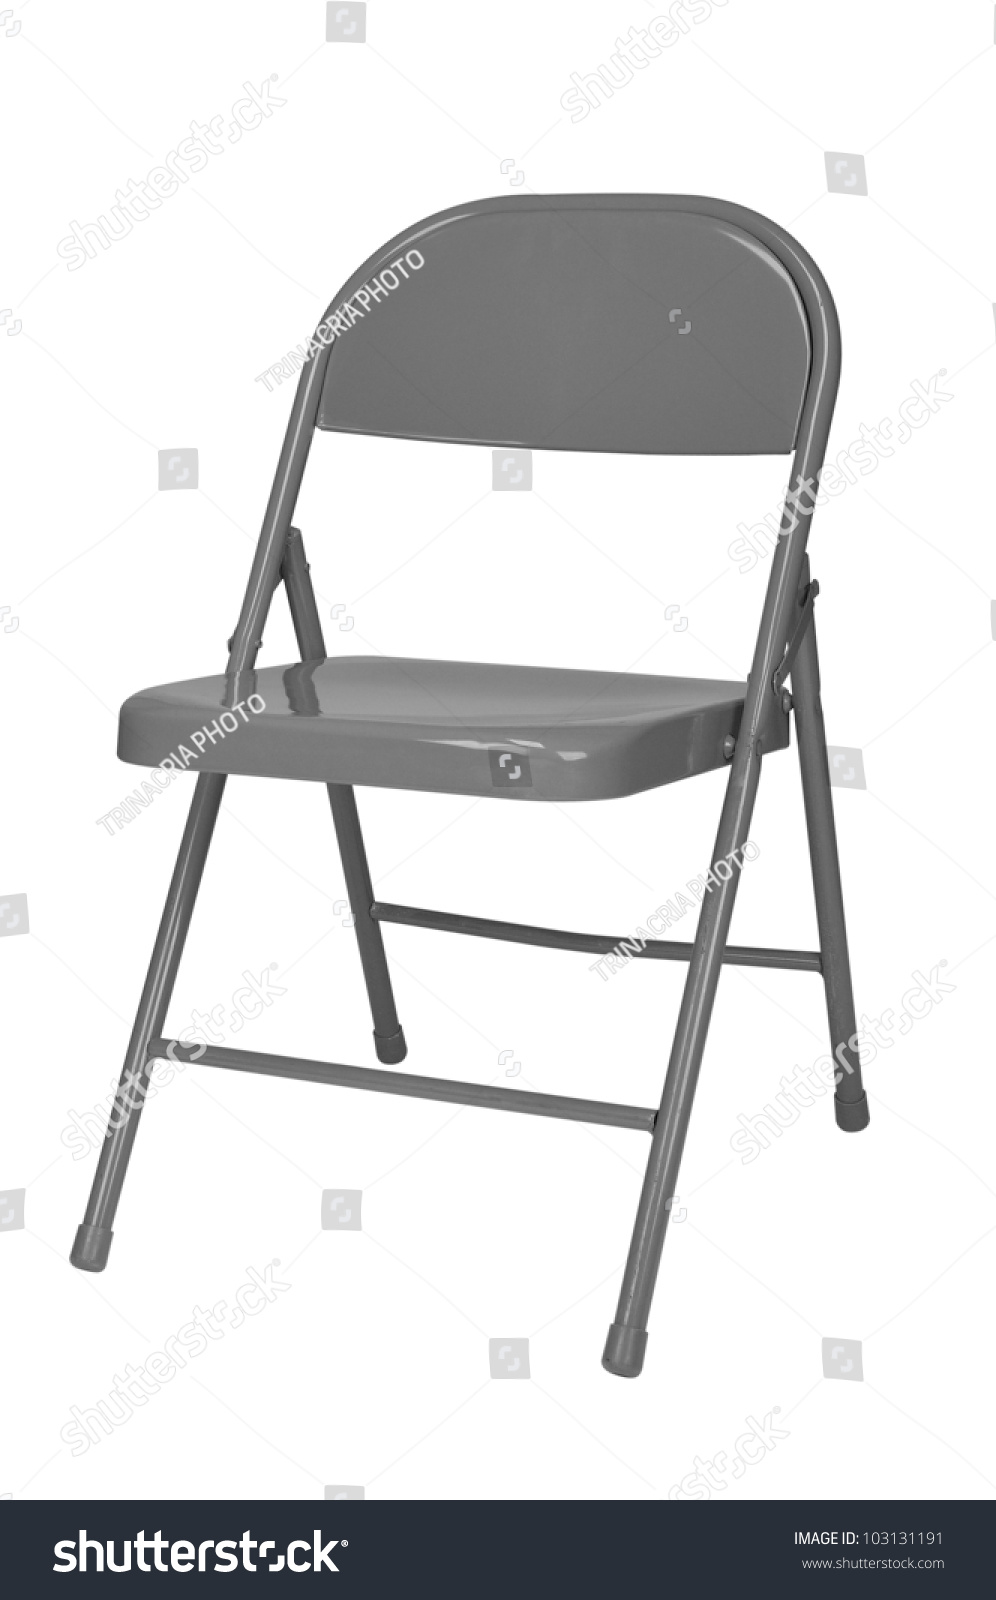 Metal folding chair isolated over a white background #103131191